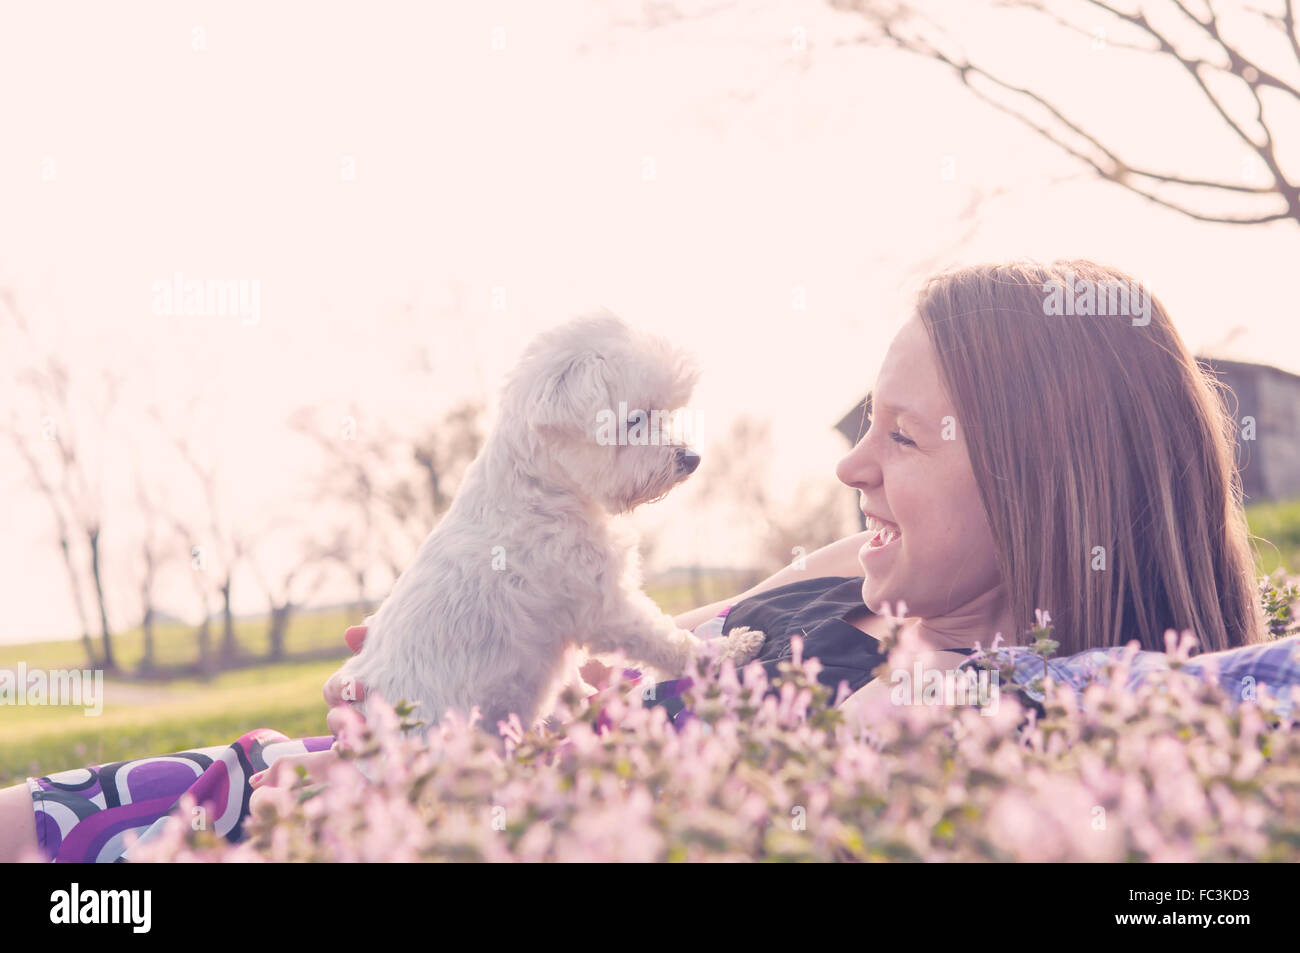 girl and dog in Spring flowers Stock Photo